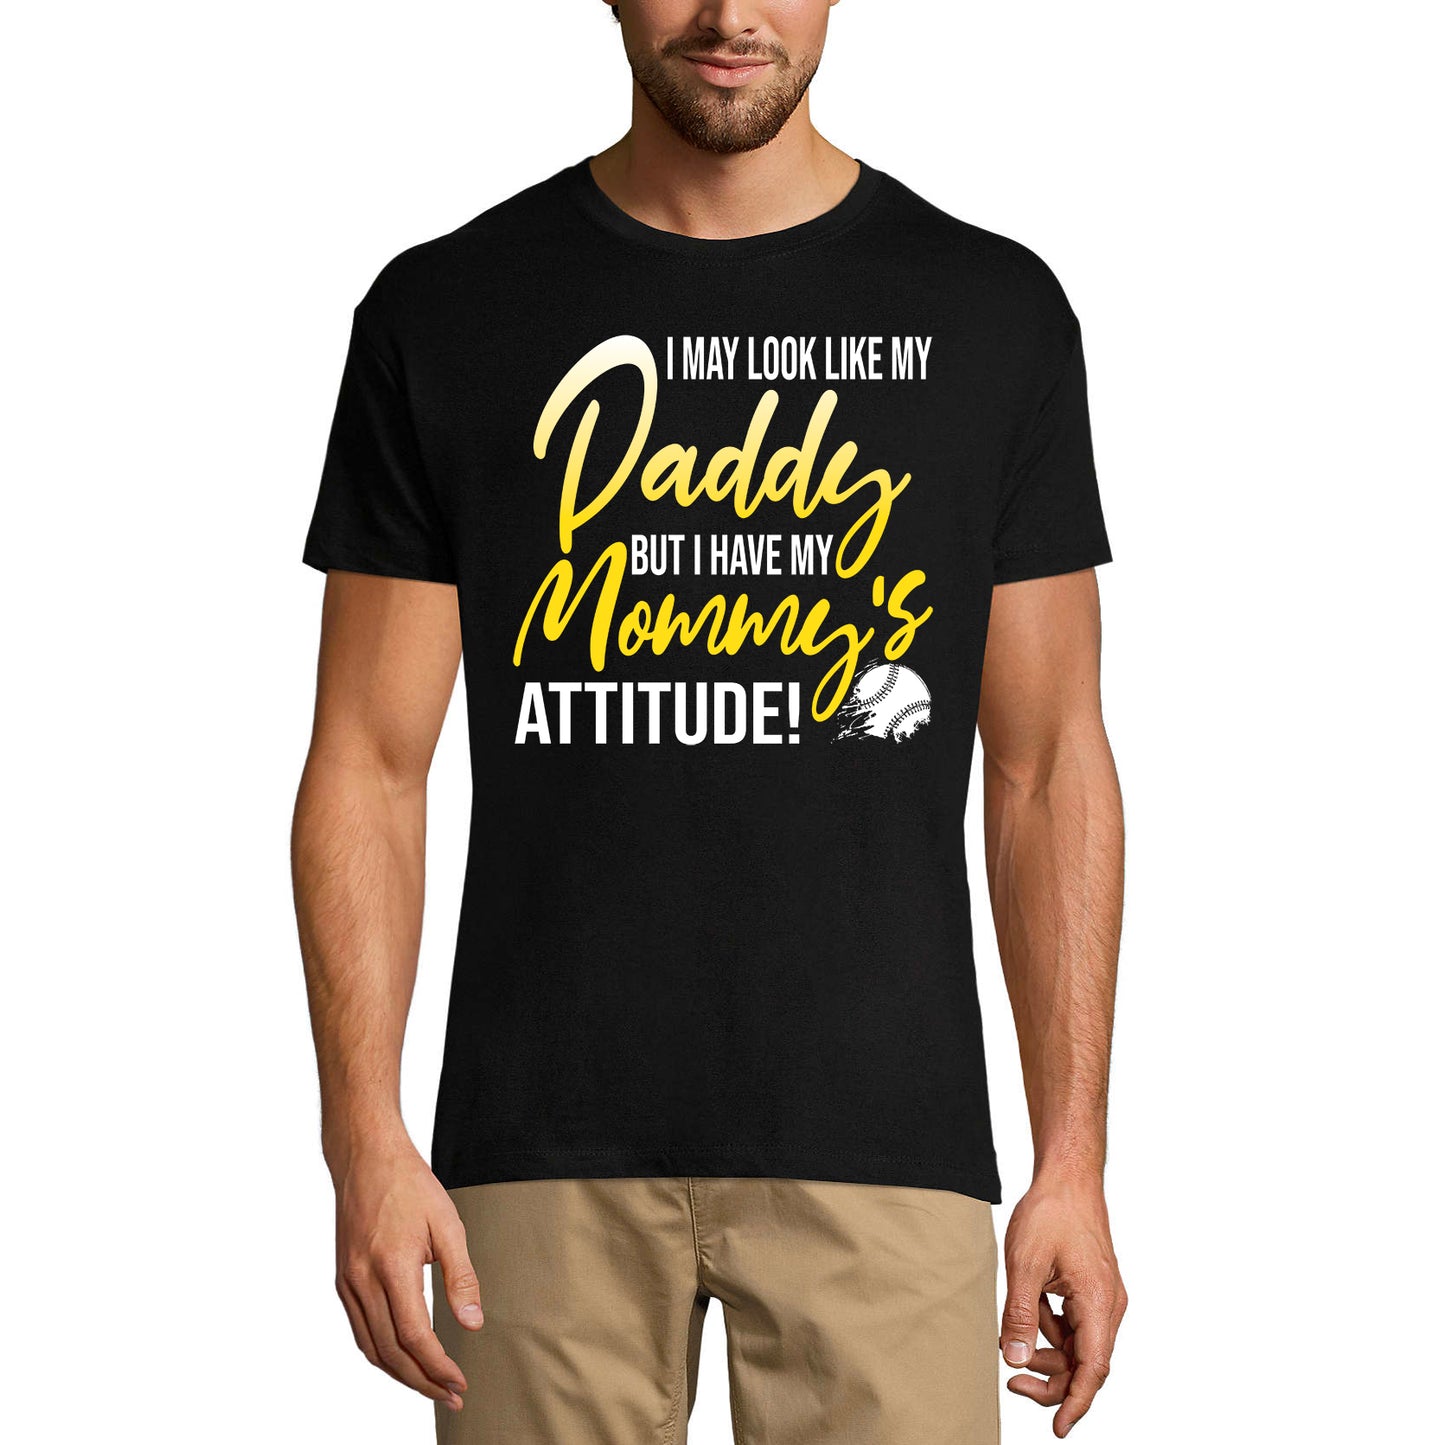 ULTRABASIC Men's Graphic T-Shirt I Have Mommy's Attitude - Parenting Life - Funny Shirt